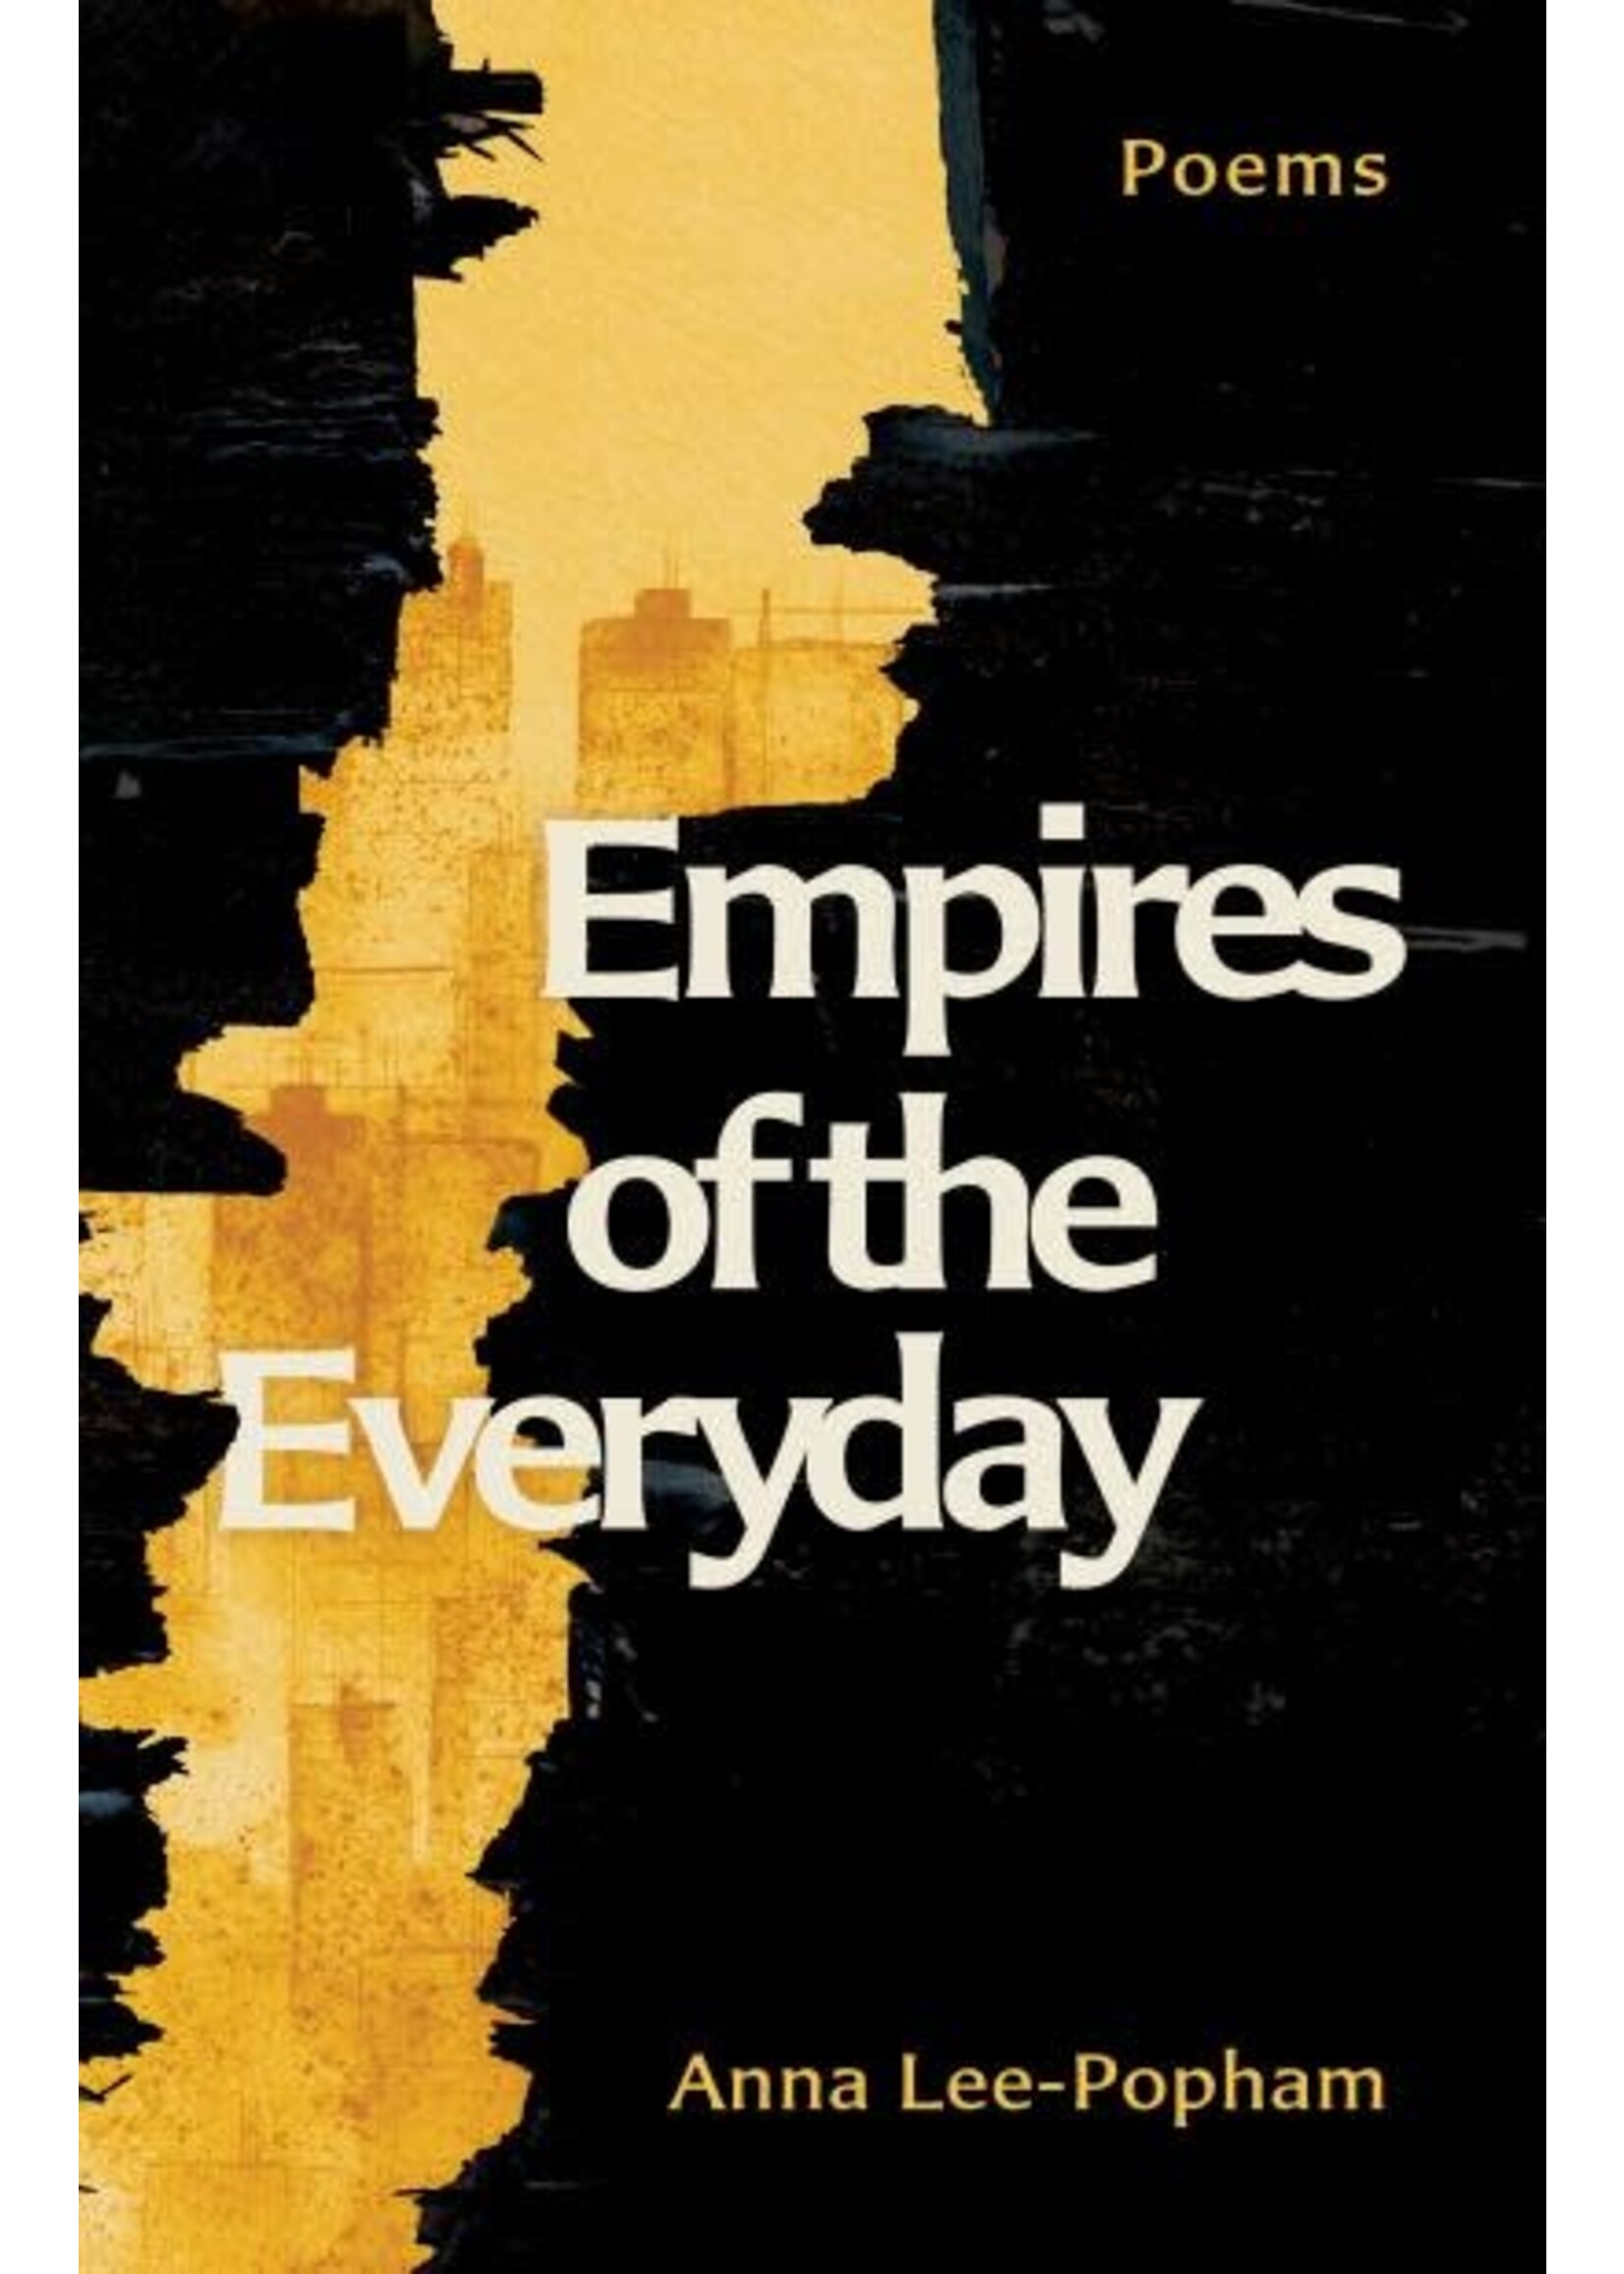 Empires of the Everyday by Anna Lee-Popham